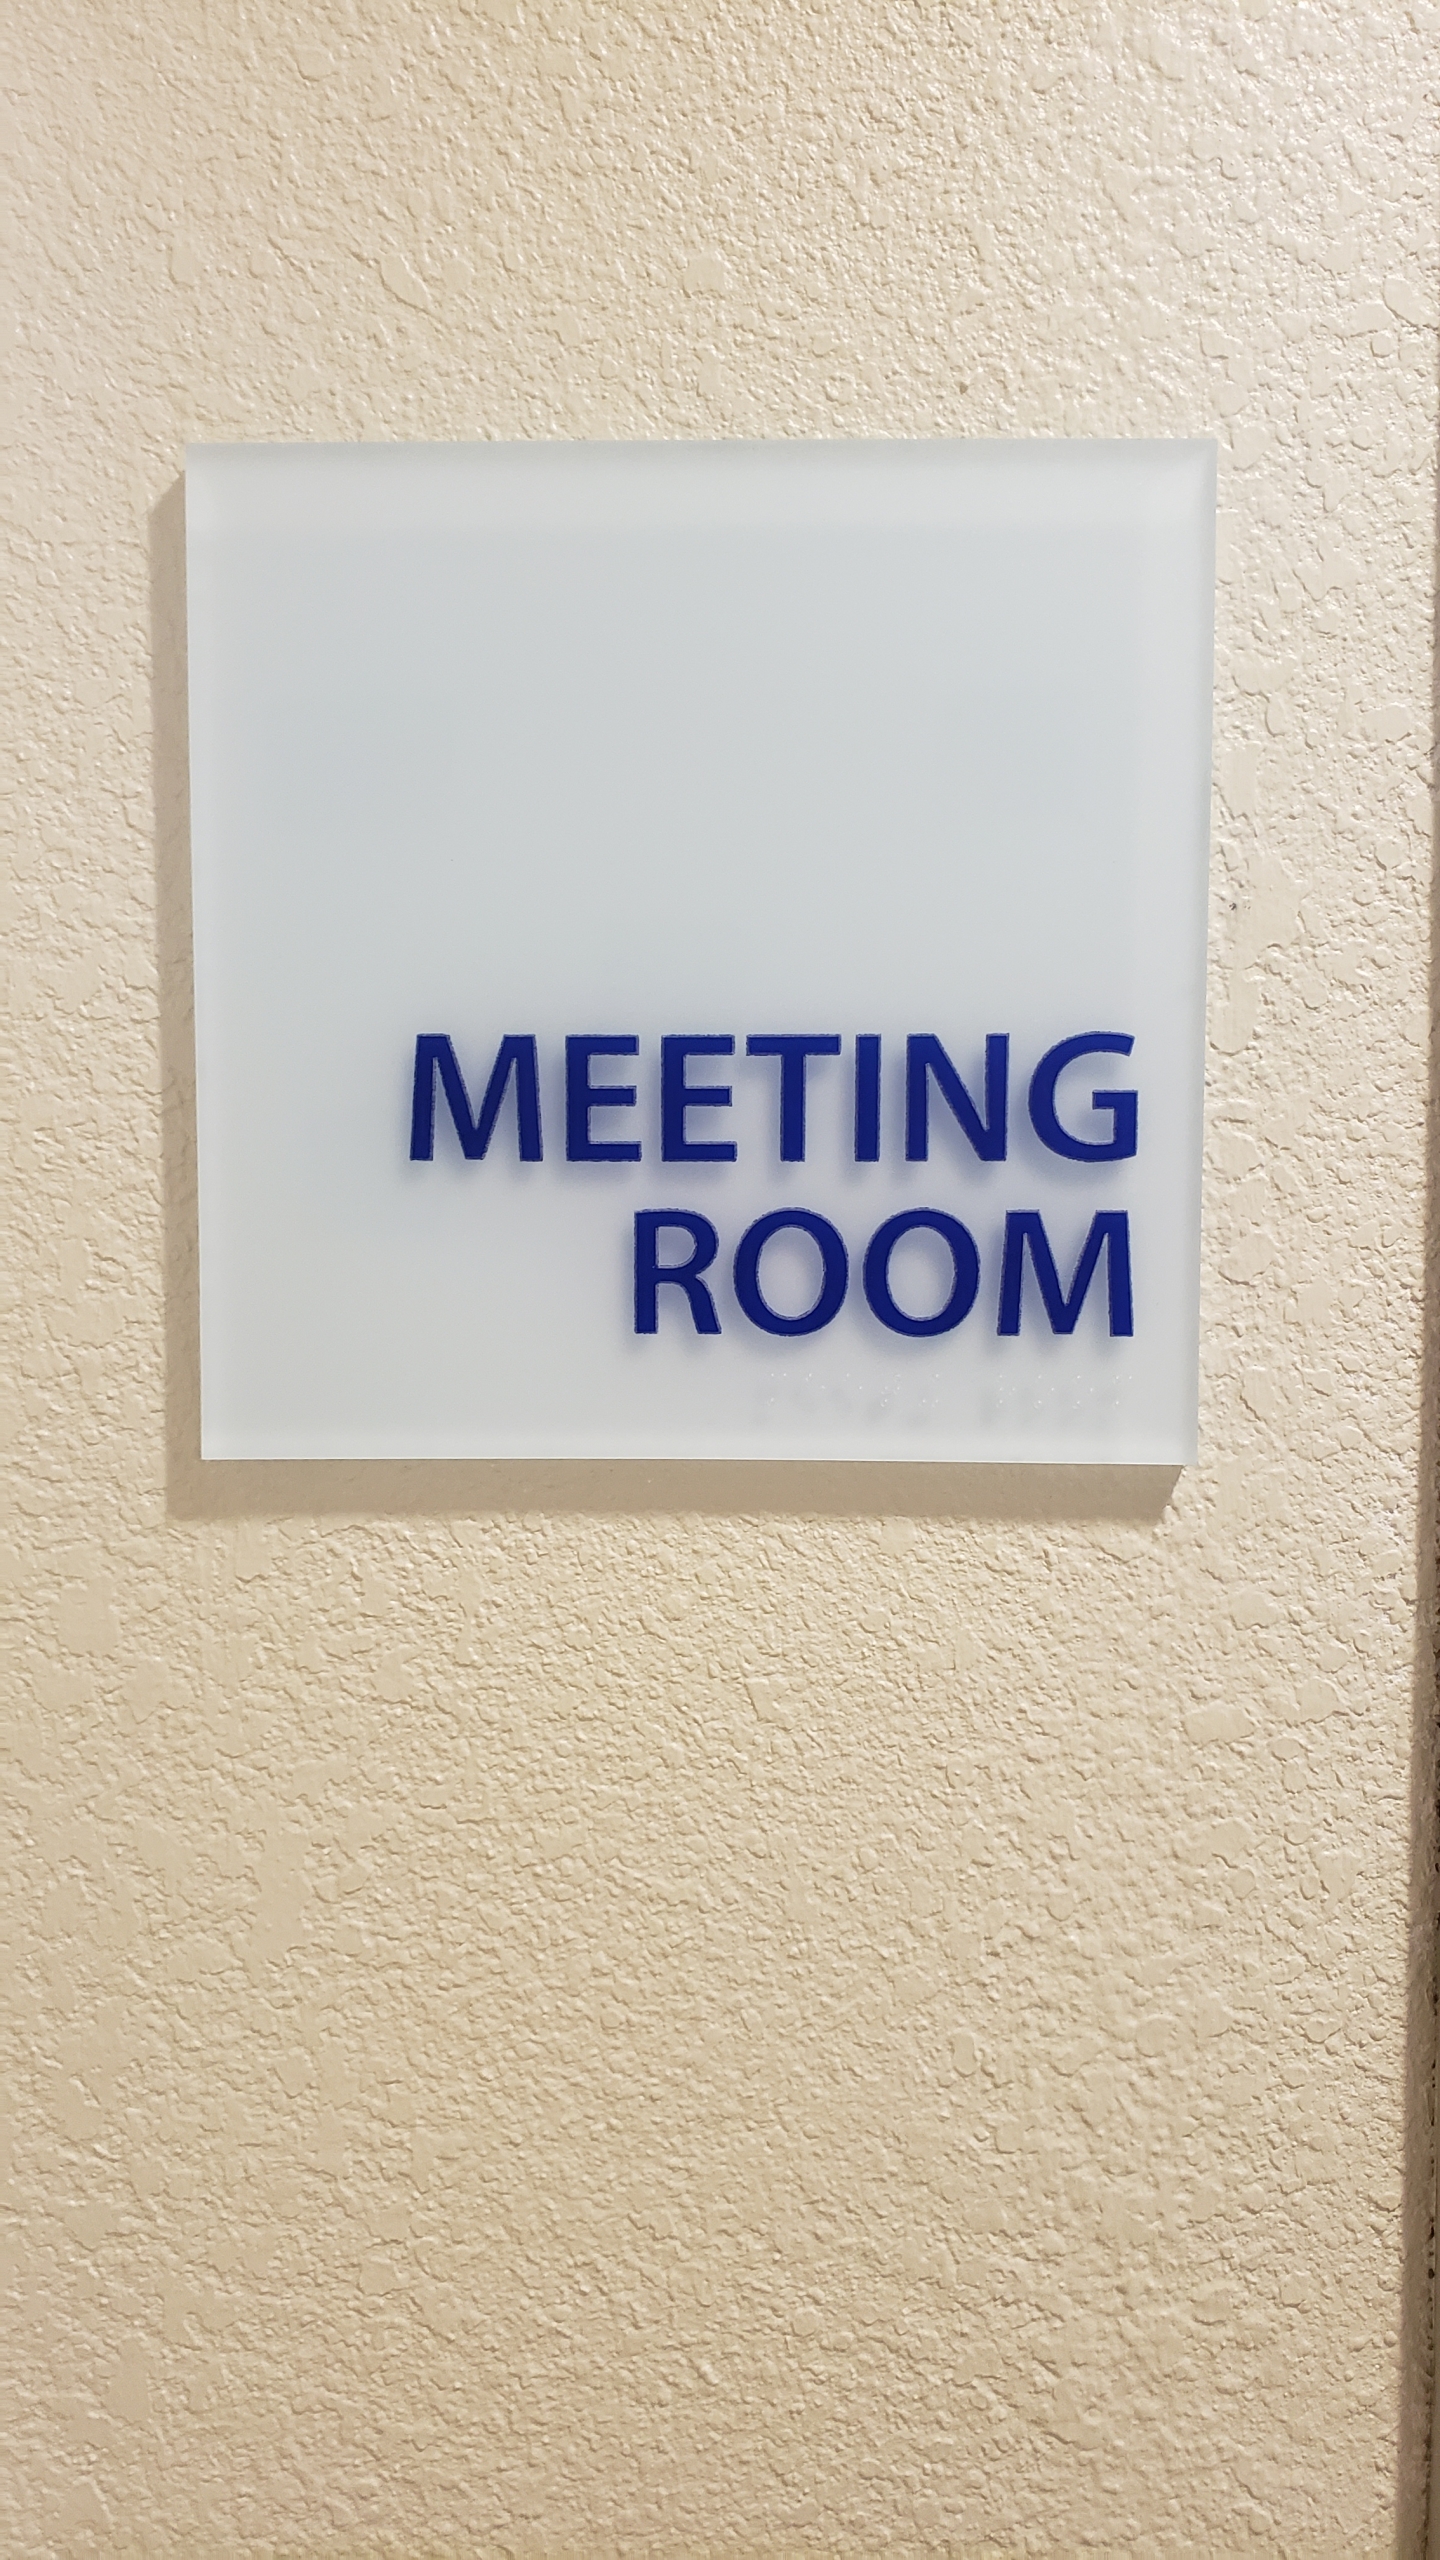 Enhance Navigational Clarity with ALTIUS Graphics’ Room Direction Signs 